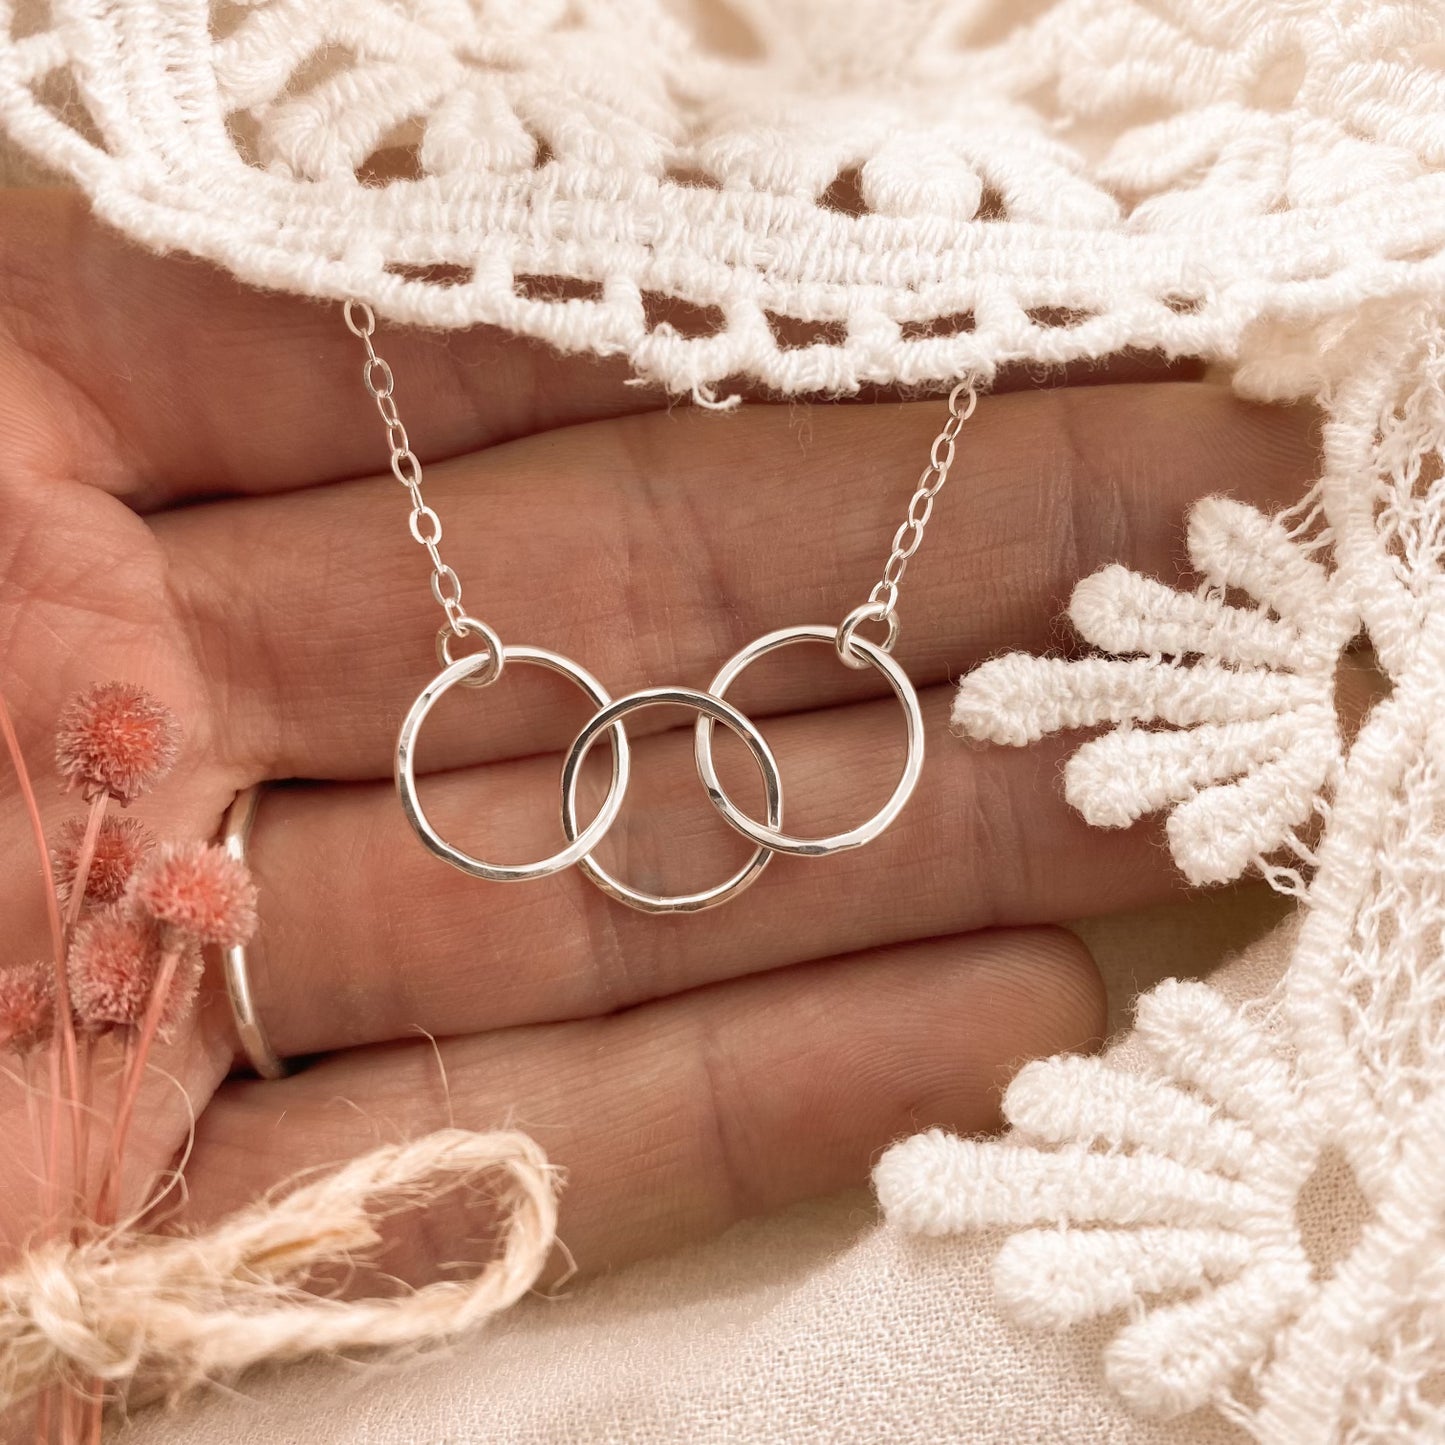 Triple hammered infinity necklace - silver